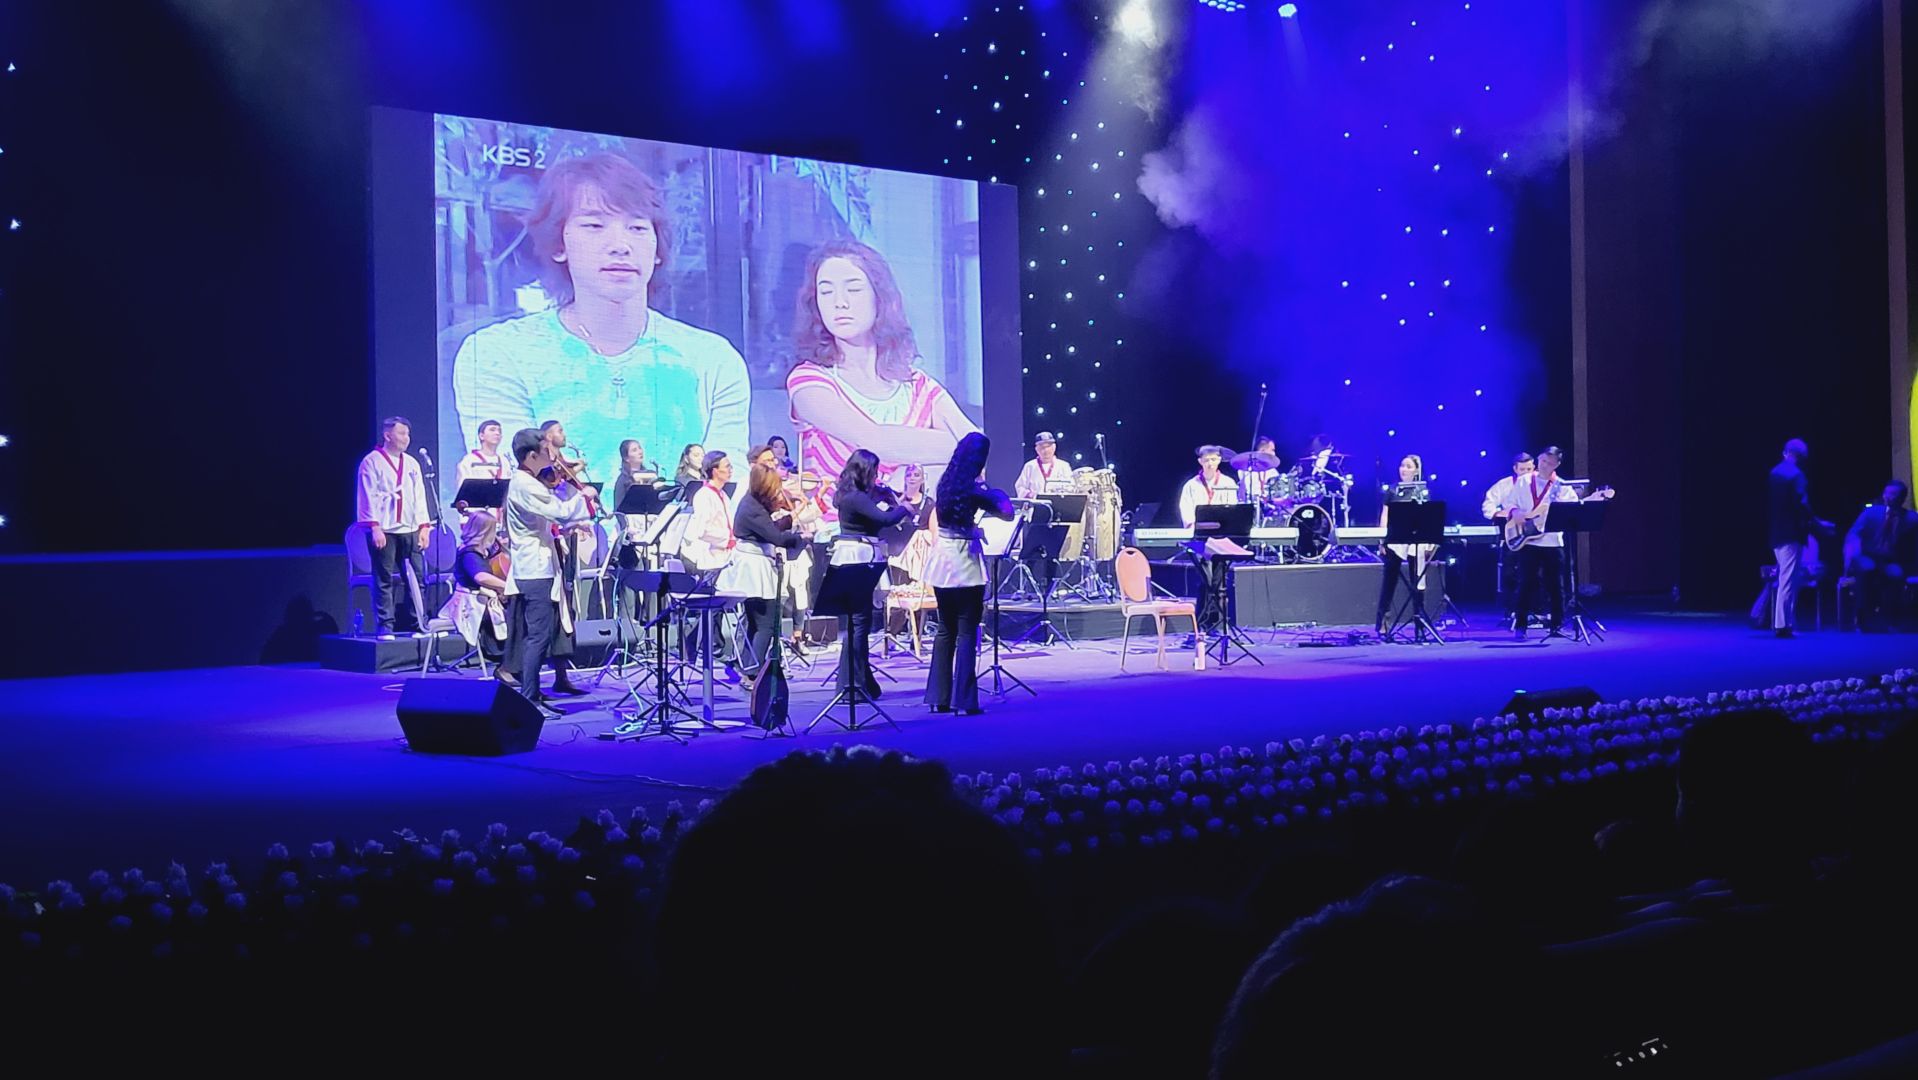 BN Team Orchestra melts hearts of Korean drama fans [PHOTOS] - Gallery Image